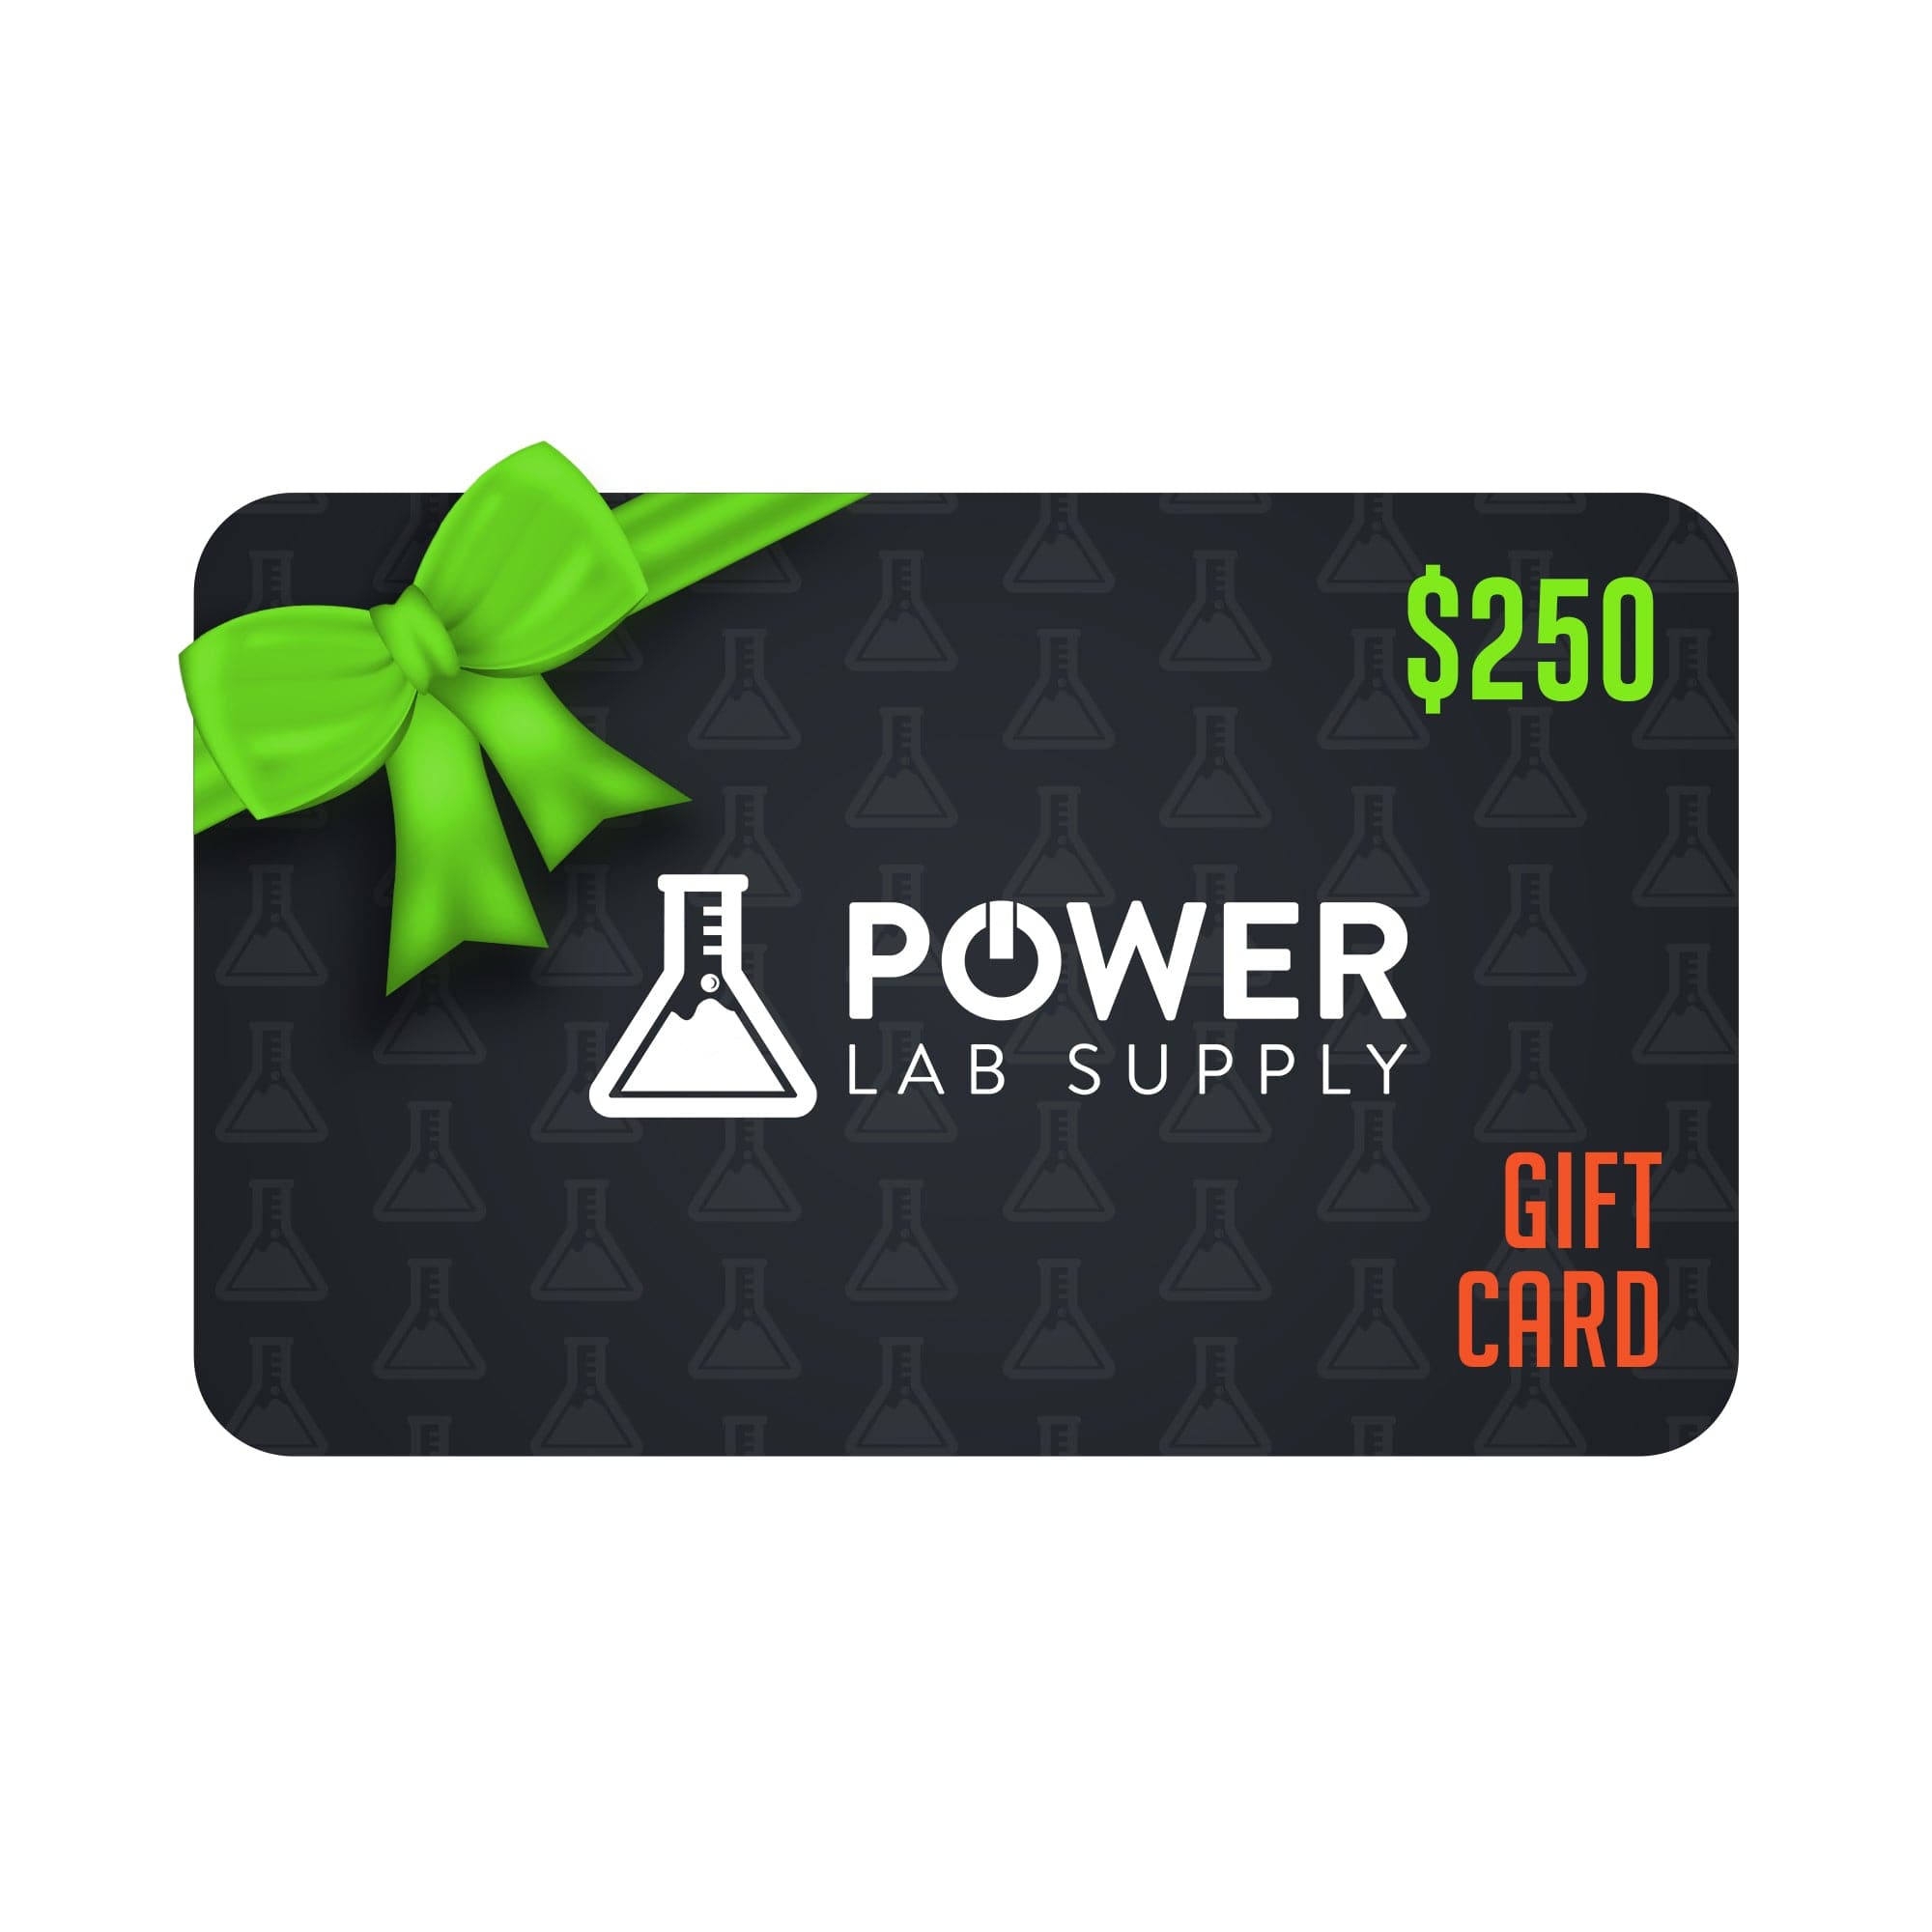 $250.00 Power Lab Supply Gift Card